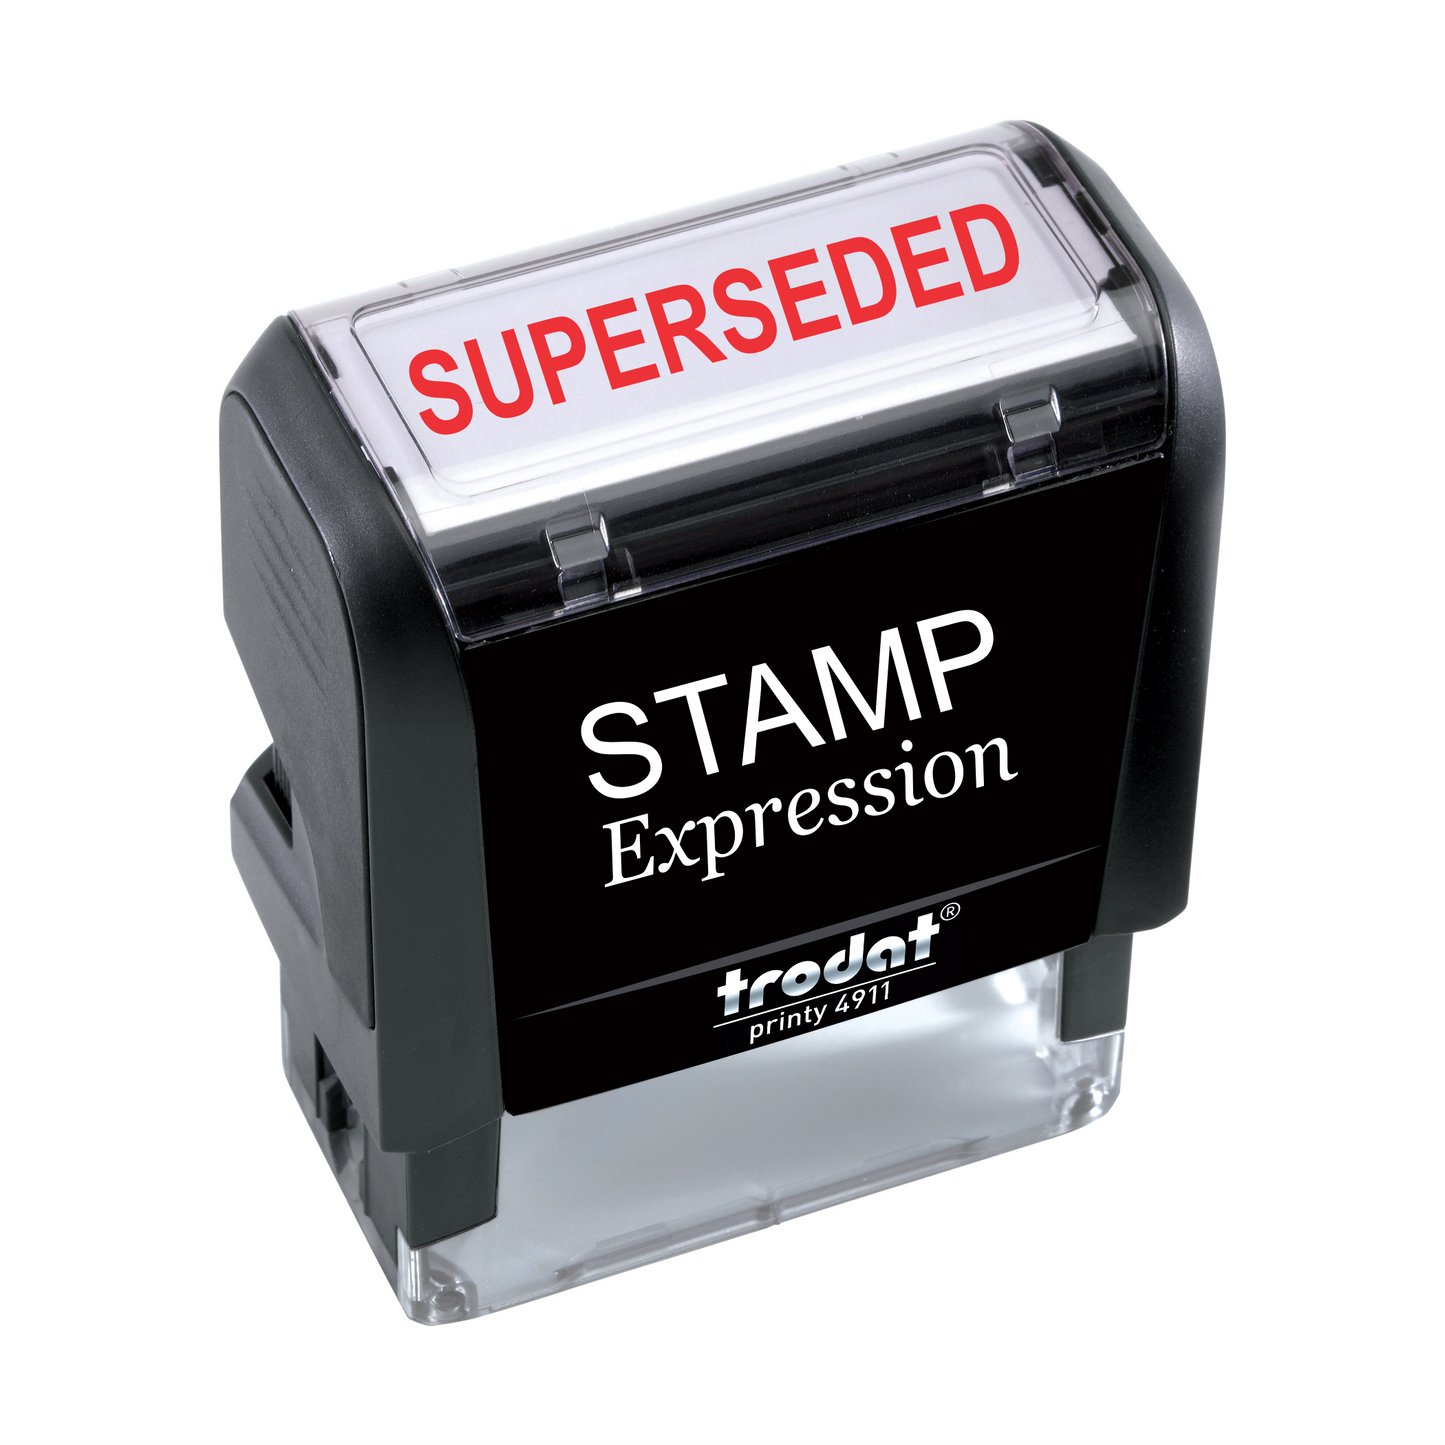 Superseded Office Self Inking Rubber Stamp (SH-5056)